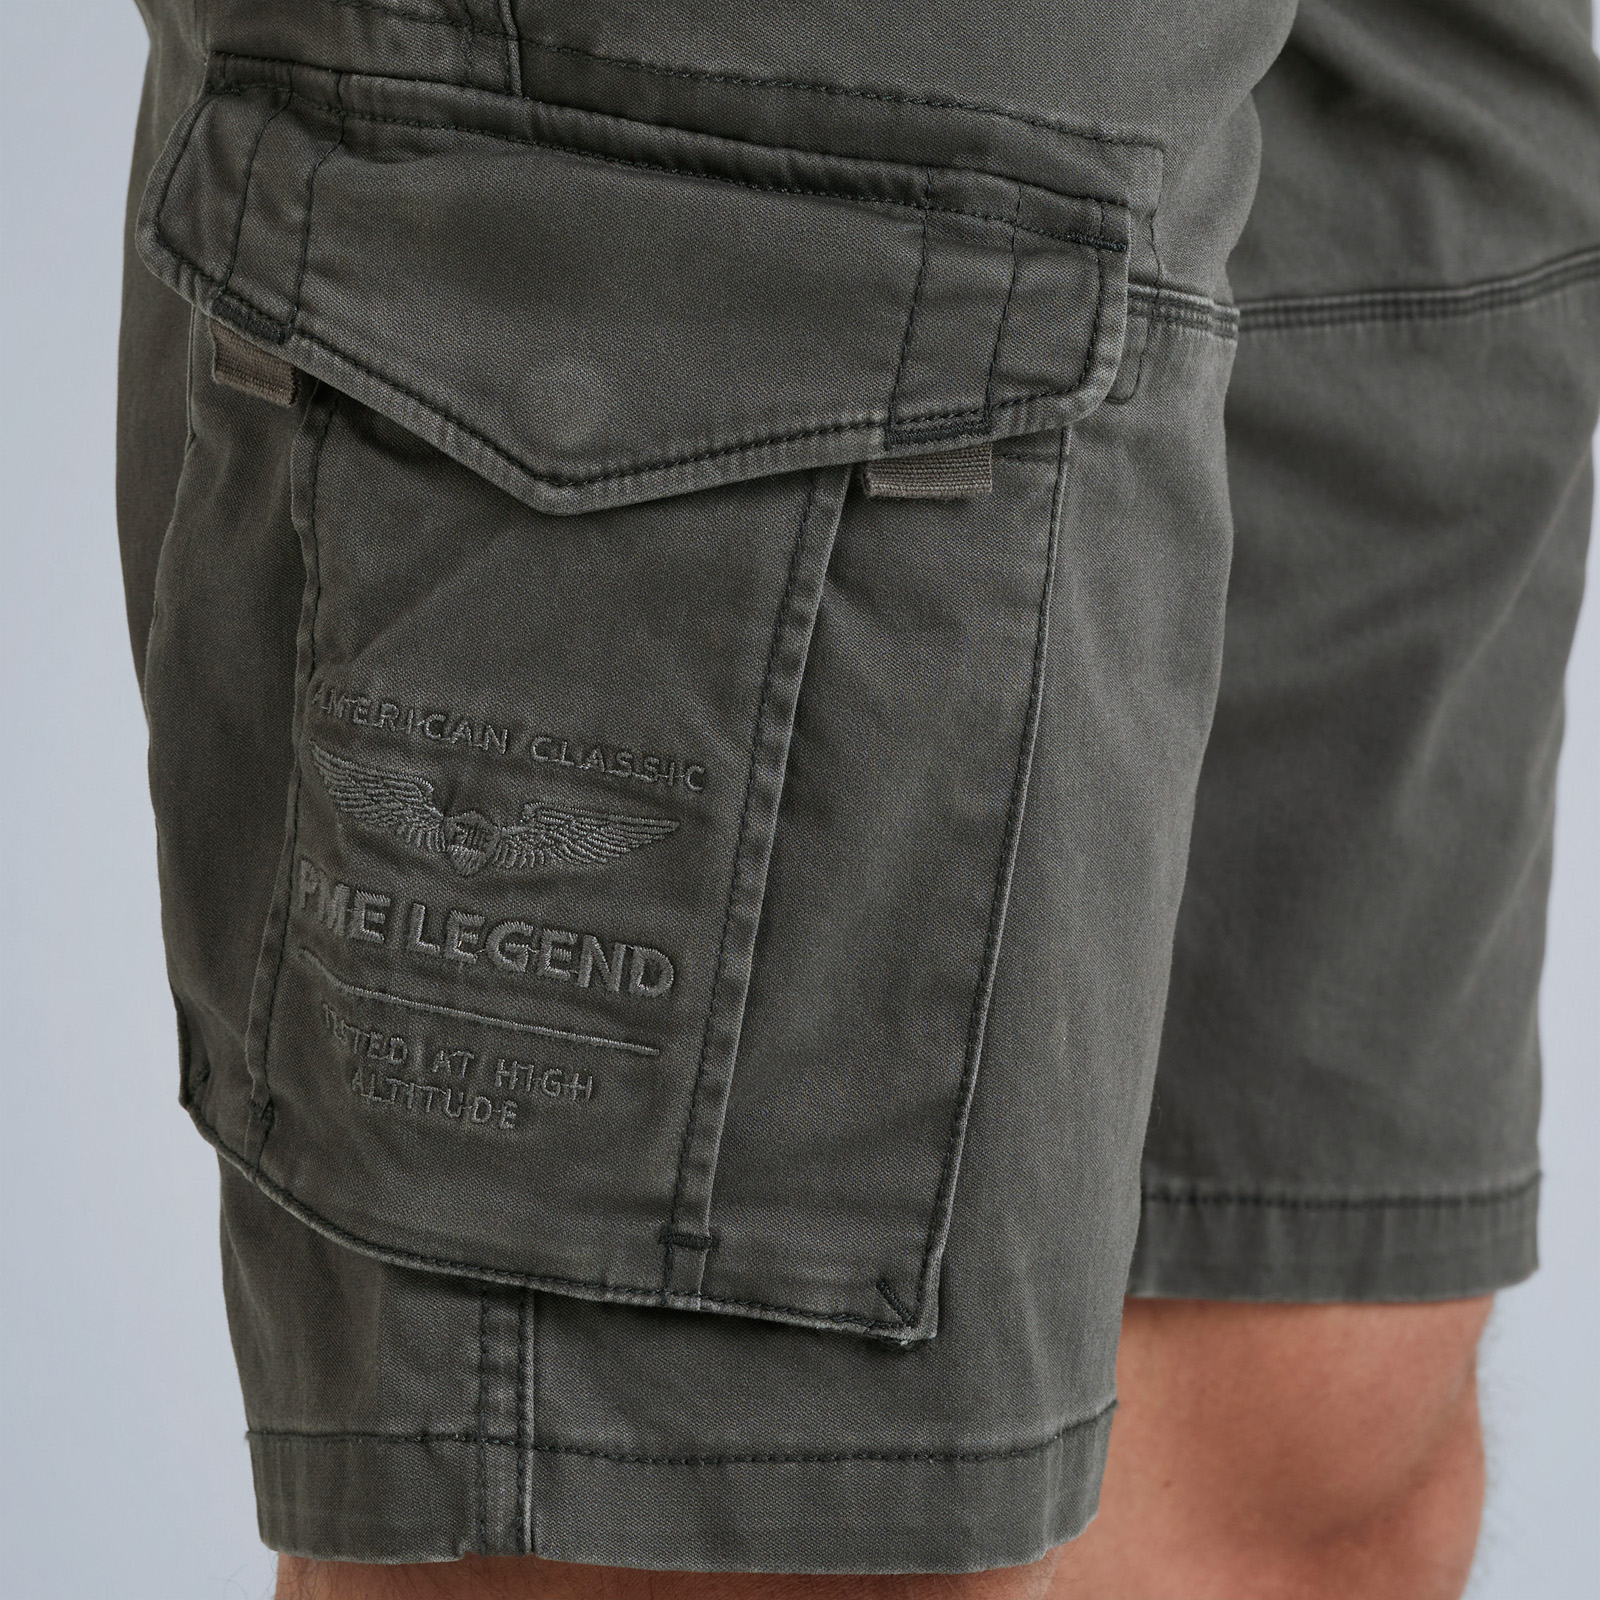 PME LEGEND | Stretch Cargo and Twill returns Free Short shipping 